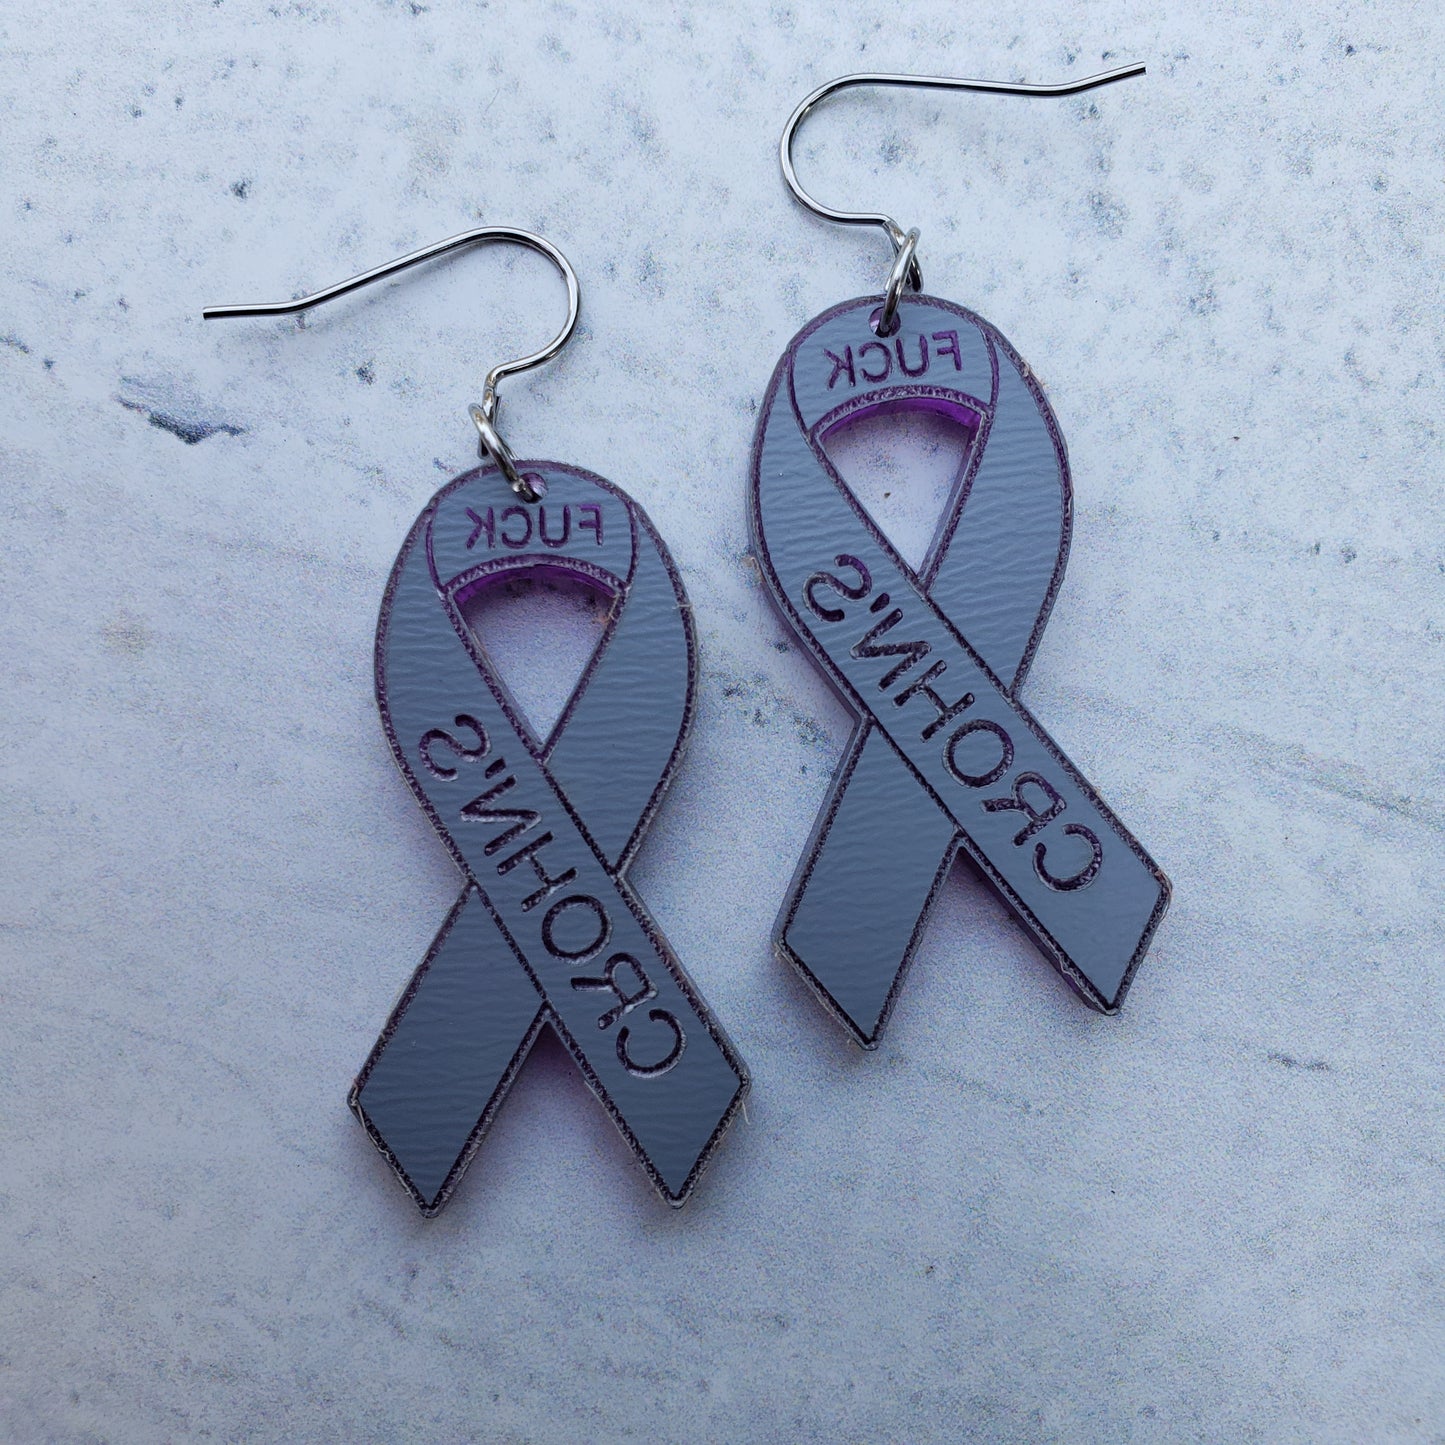 Backside of Fuck Crohn's Engraved purple mirror acrylic awareness ribbons on stainless steel earring wires.